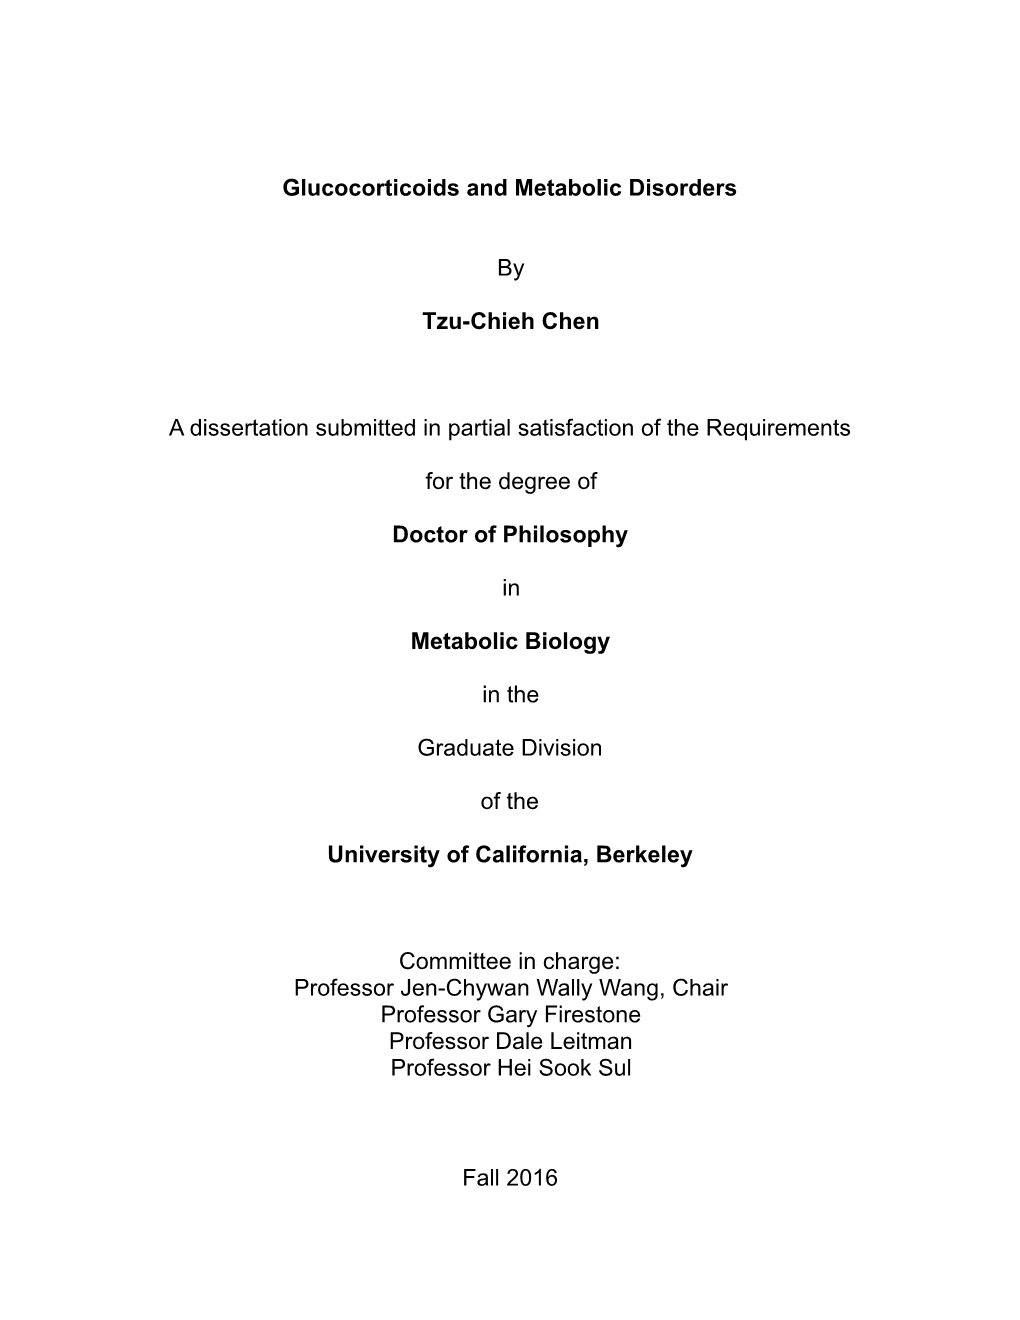 Glucocorticoids and Metabolic Disorders by Tzu-Chieh Chen A